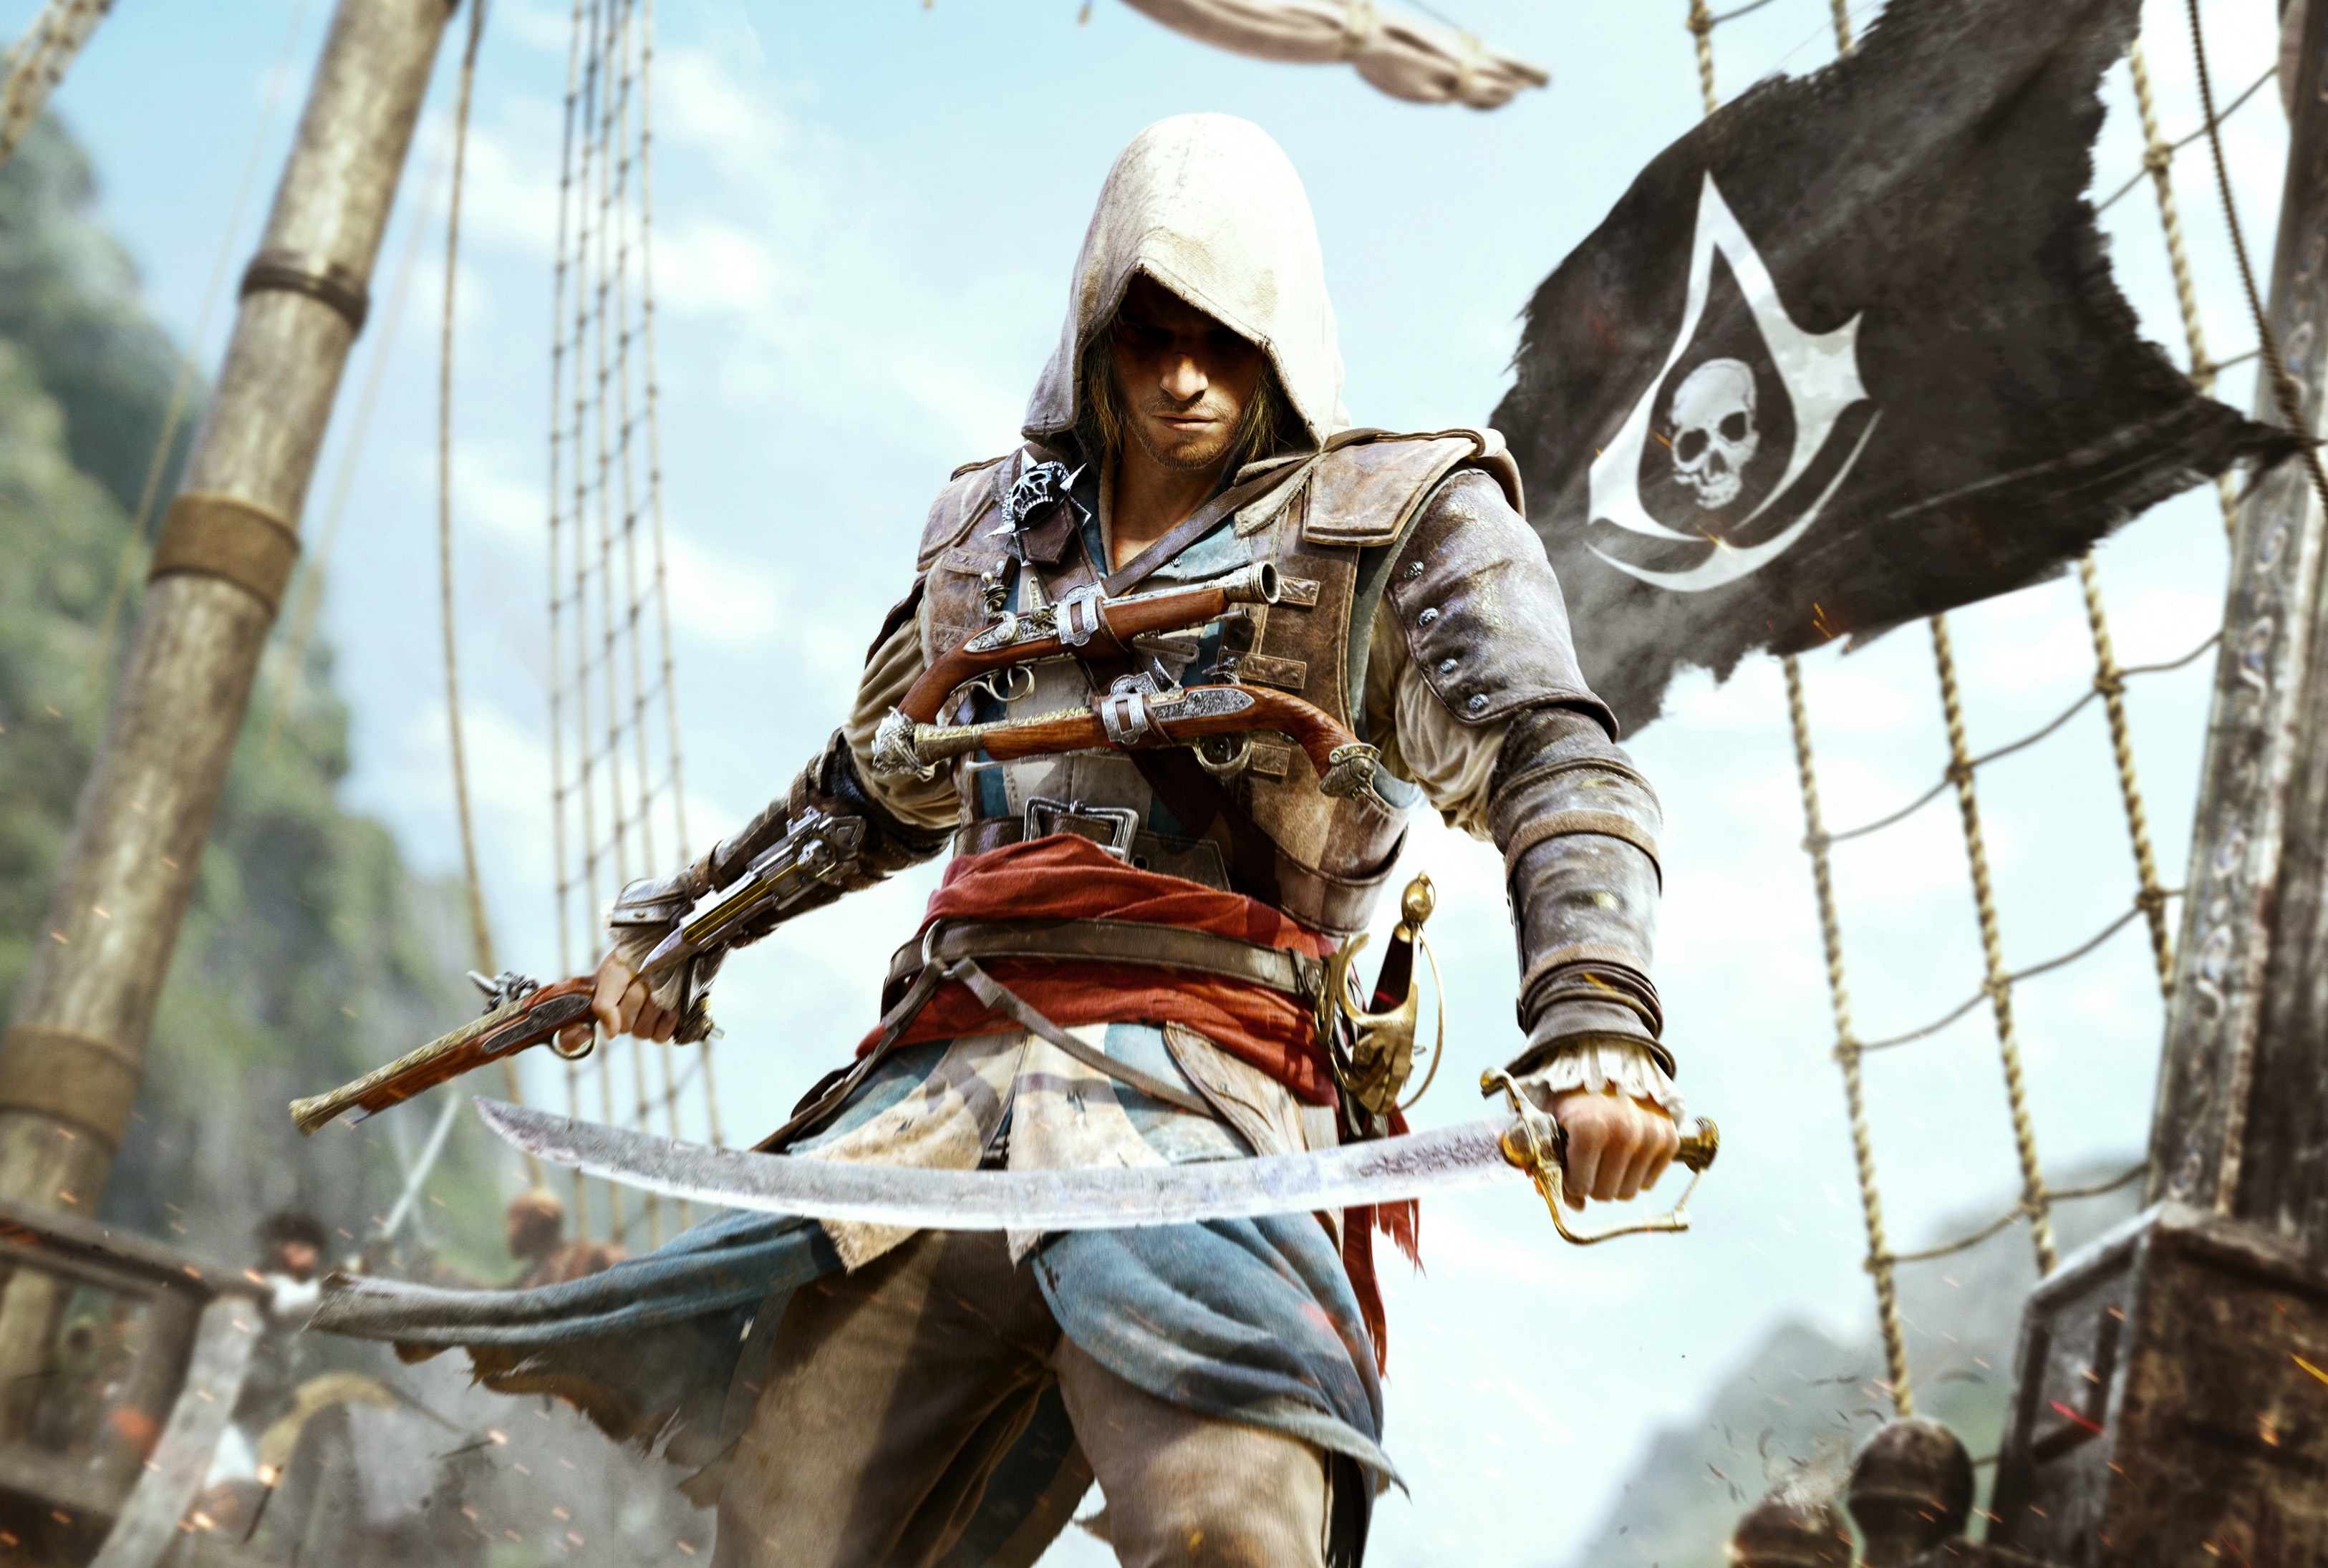 10 Top Assassin Creed Black Flag Wallpaper FULL HD 1080p For PC Background